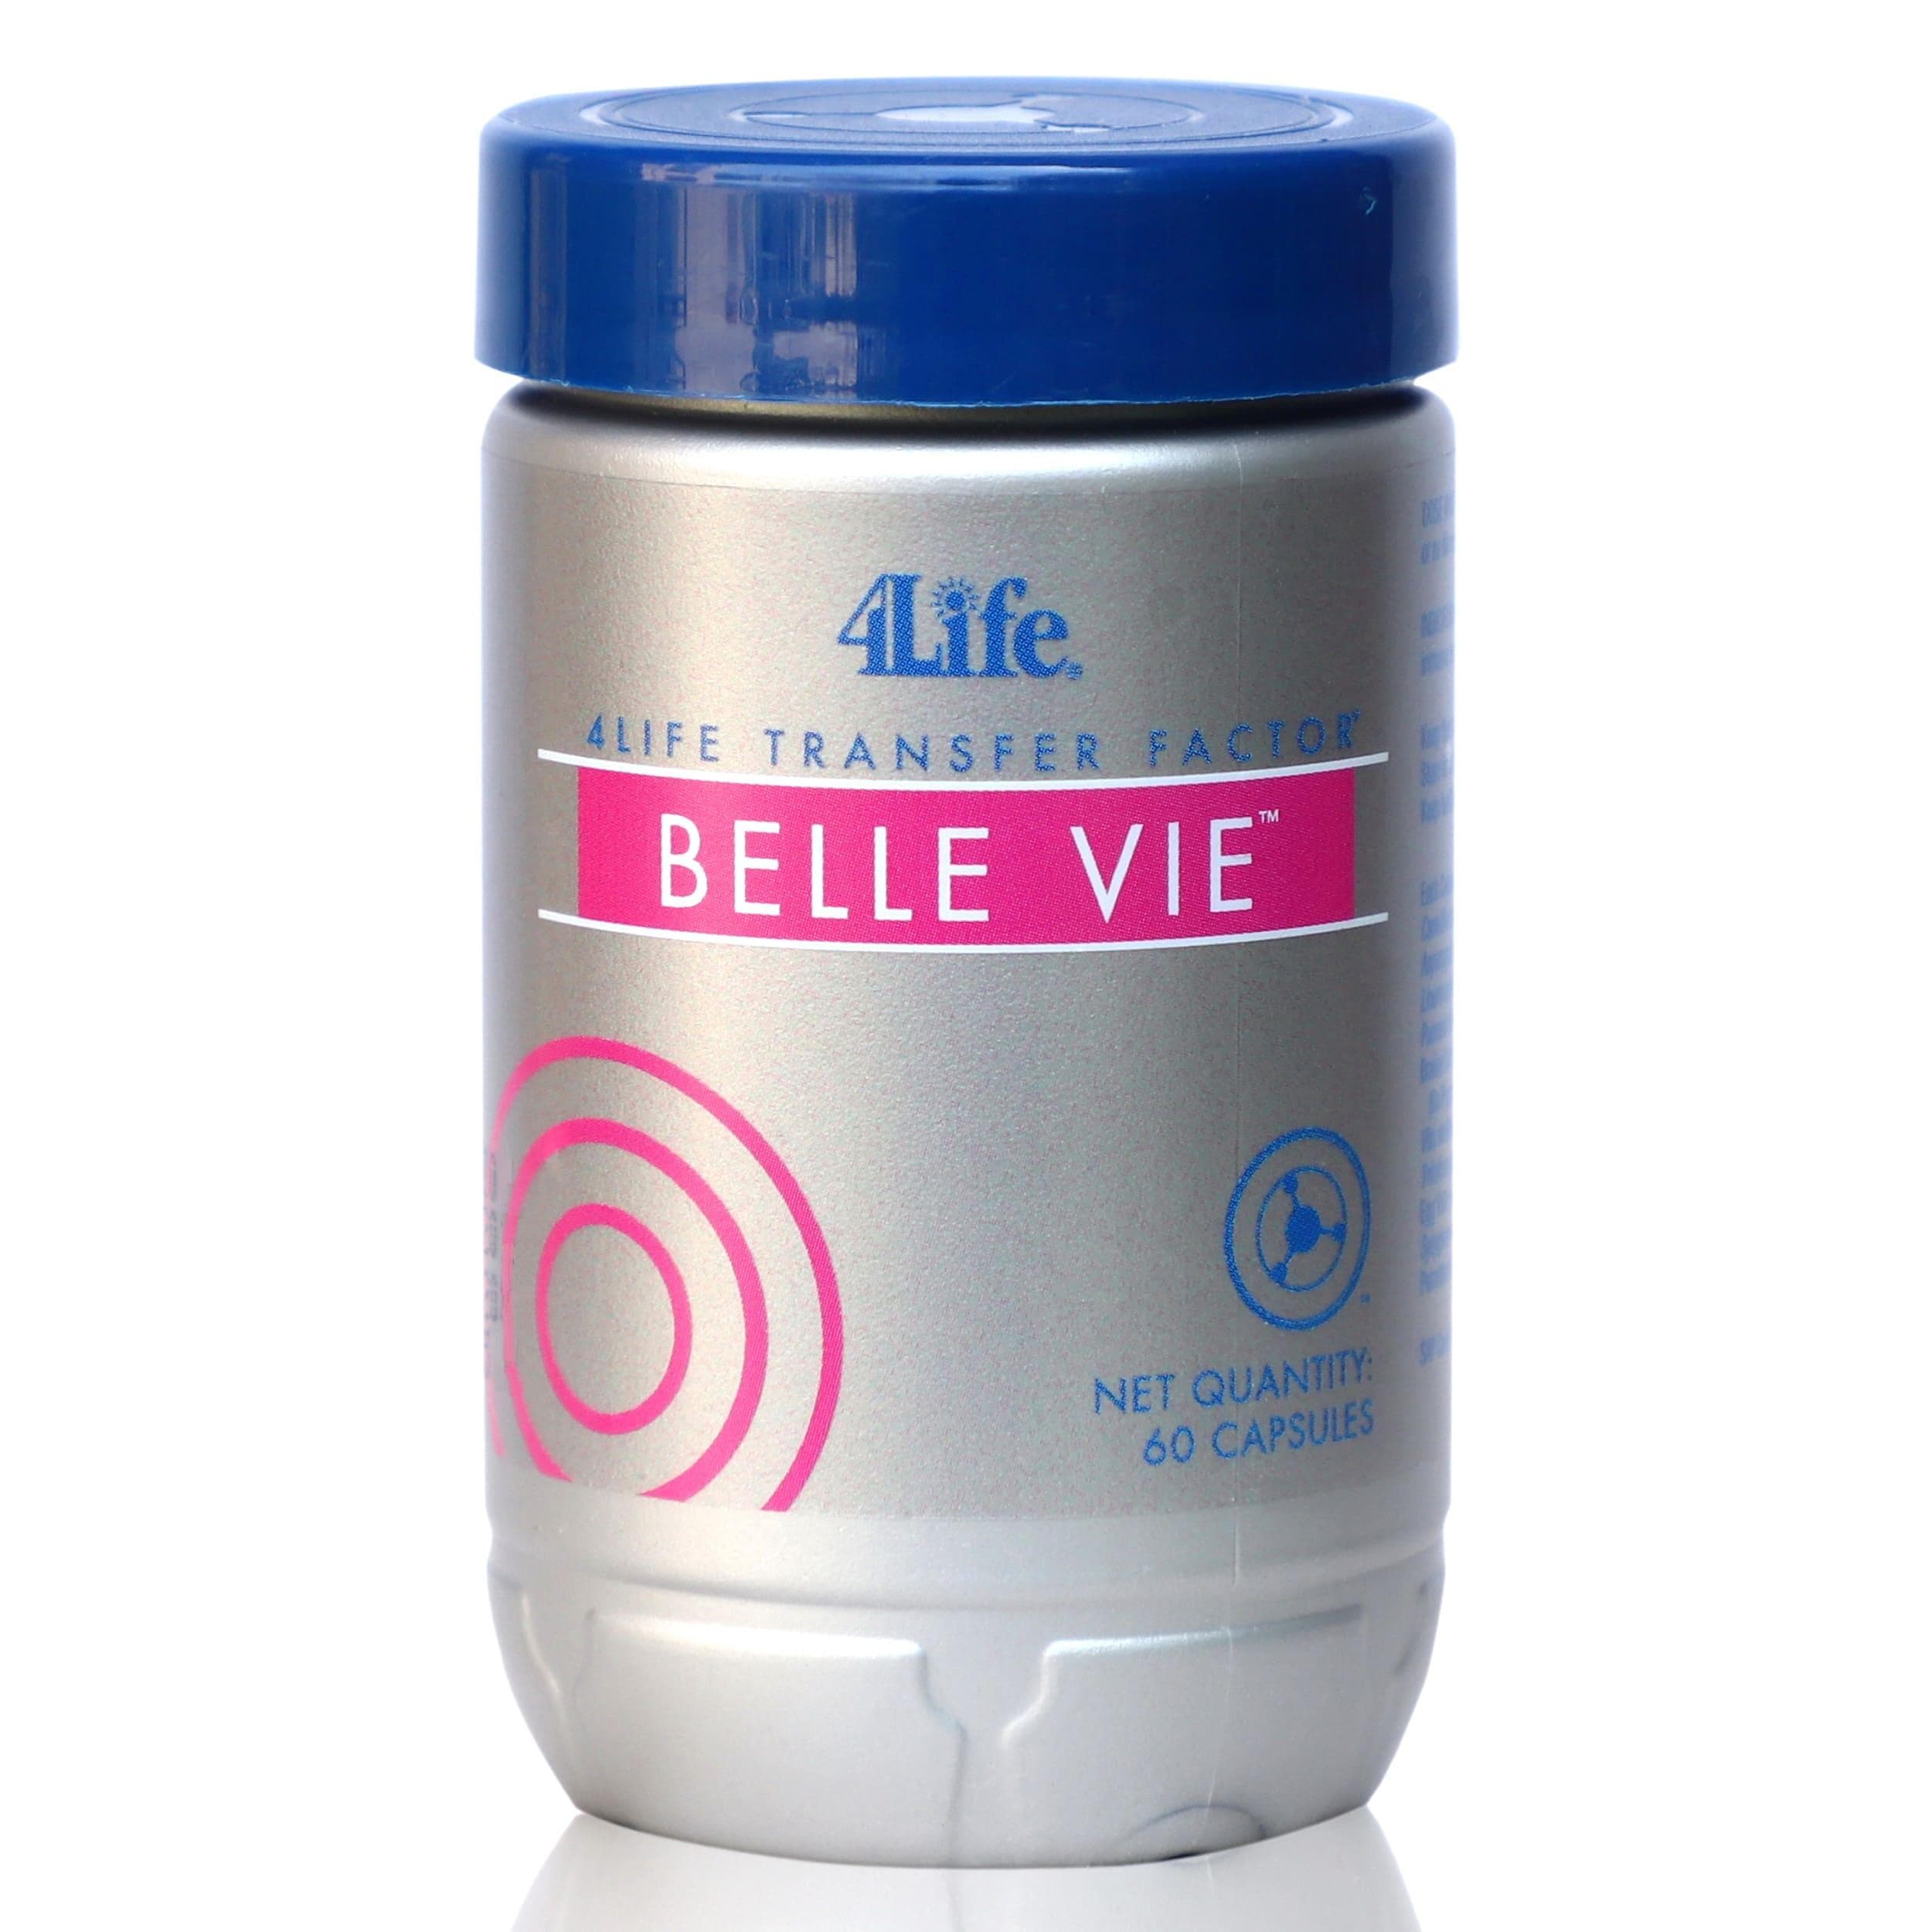 Uniherbs India Capsules 4Life Transfer Factor Belle Vie Capsules : Supports Healthy Hormone Balance and Improves Immune System Function in Women (60 Capsules)